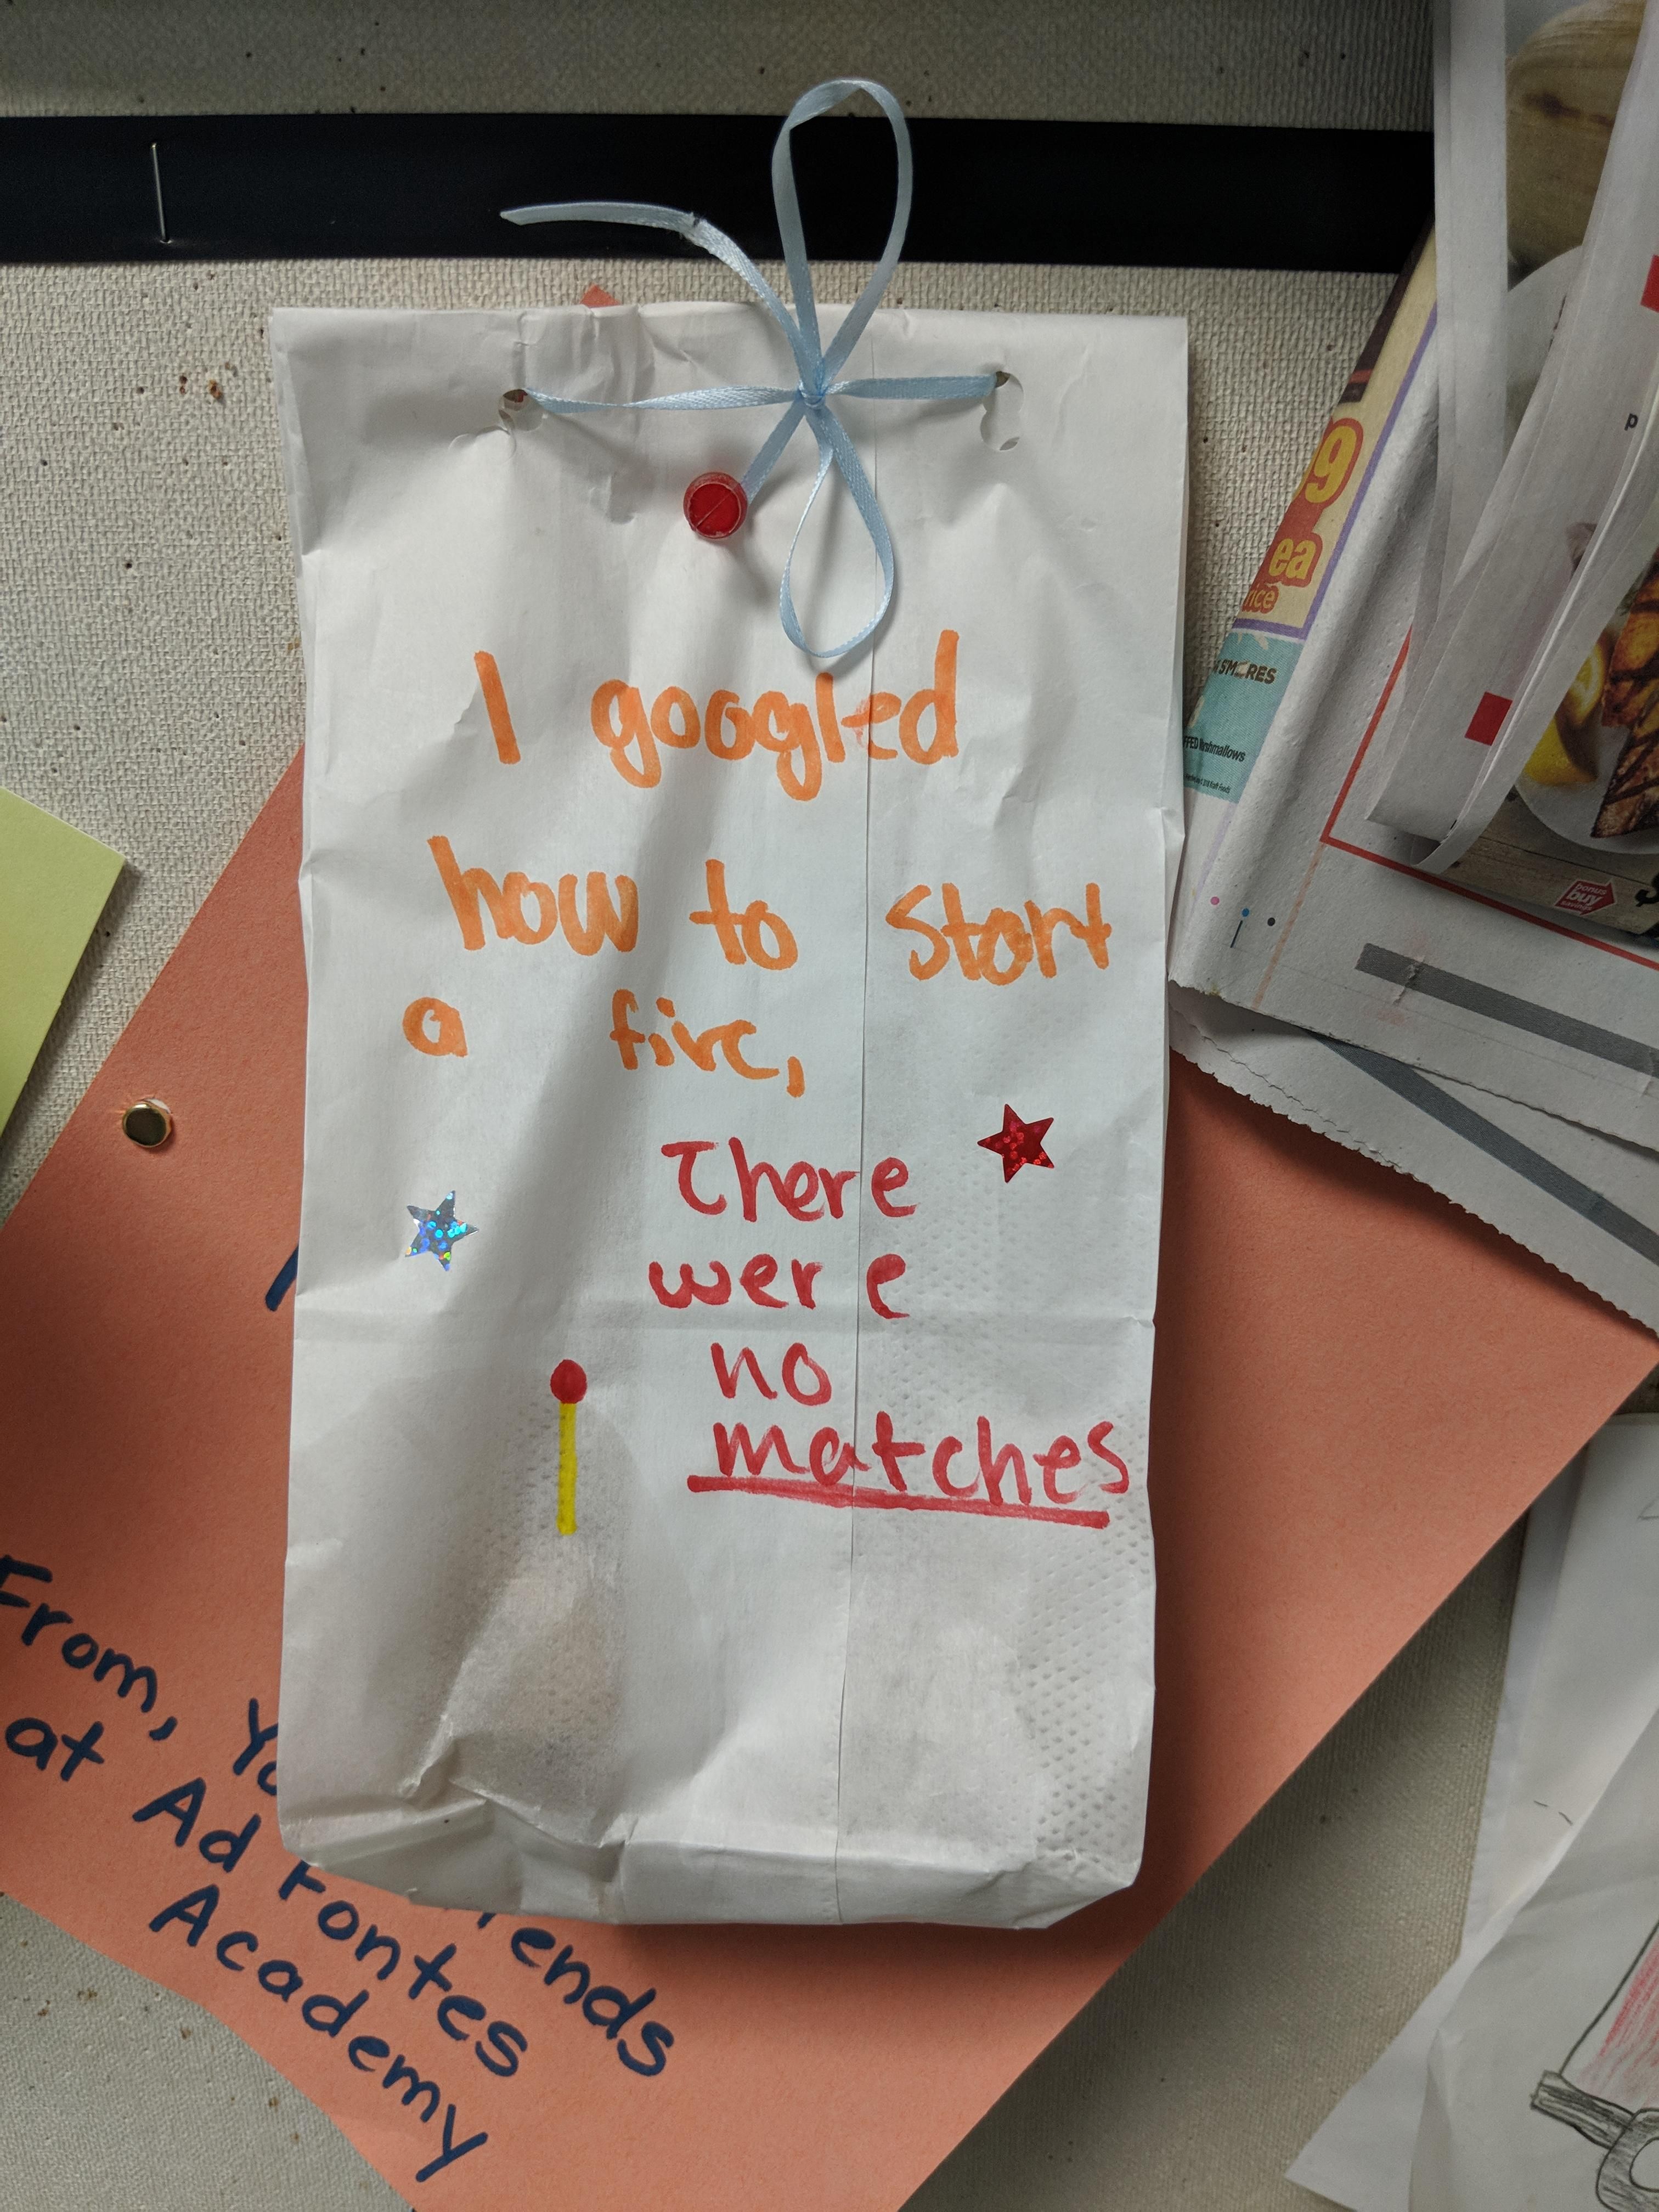 Kid from a local elementary school were asked to bake assorted cookies, put them in a bag, and write something to the firefighters at the nearby firehouse on the bag...